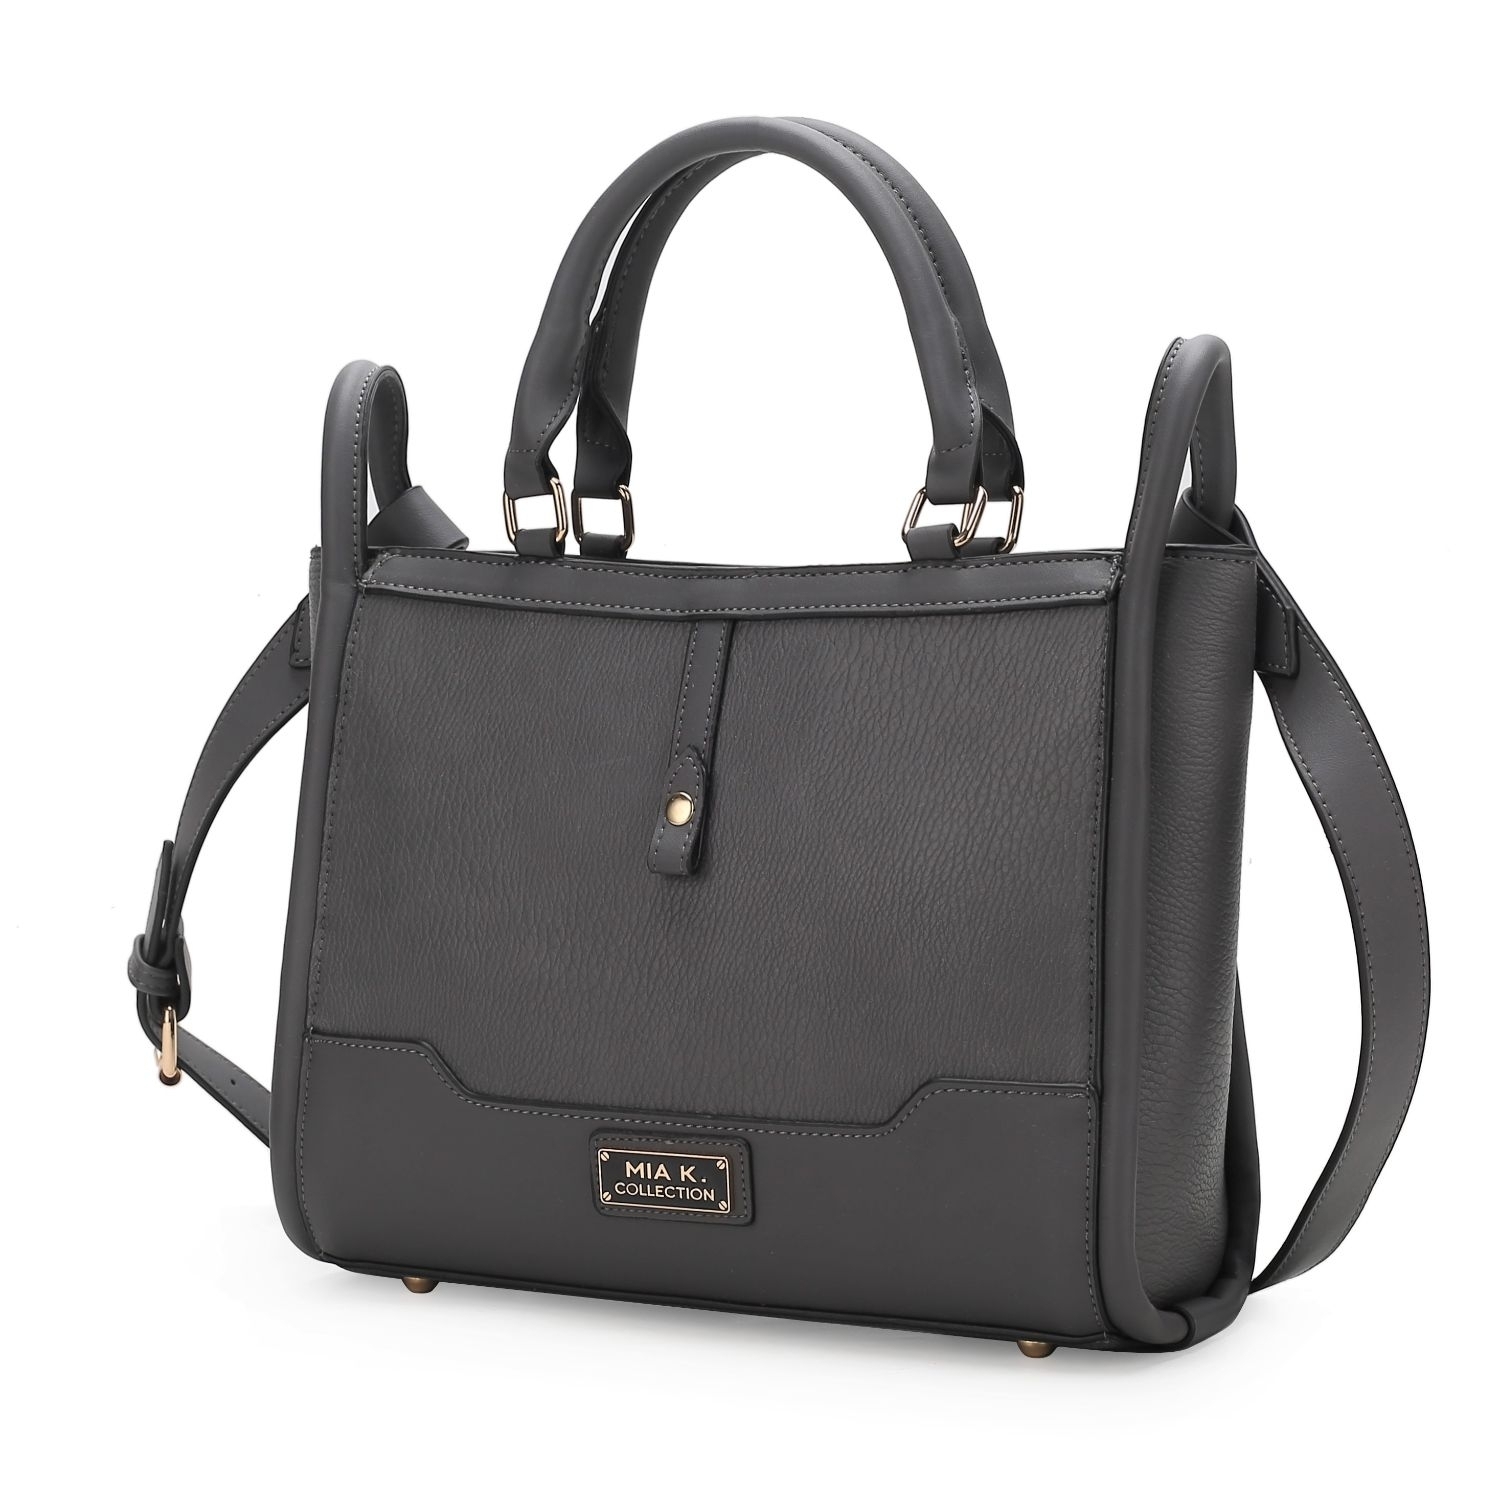 MKF Collection Melody Vegan Leather Tote By Mia K - Charcoal